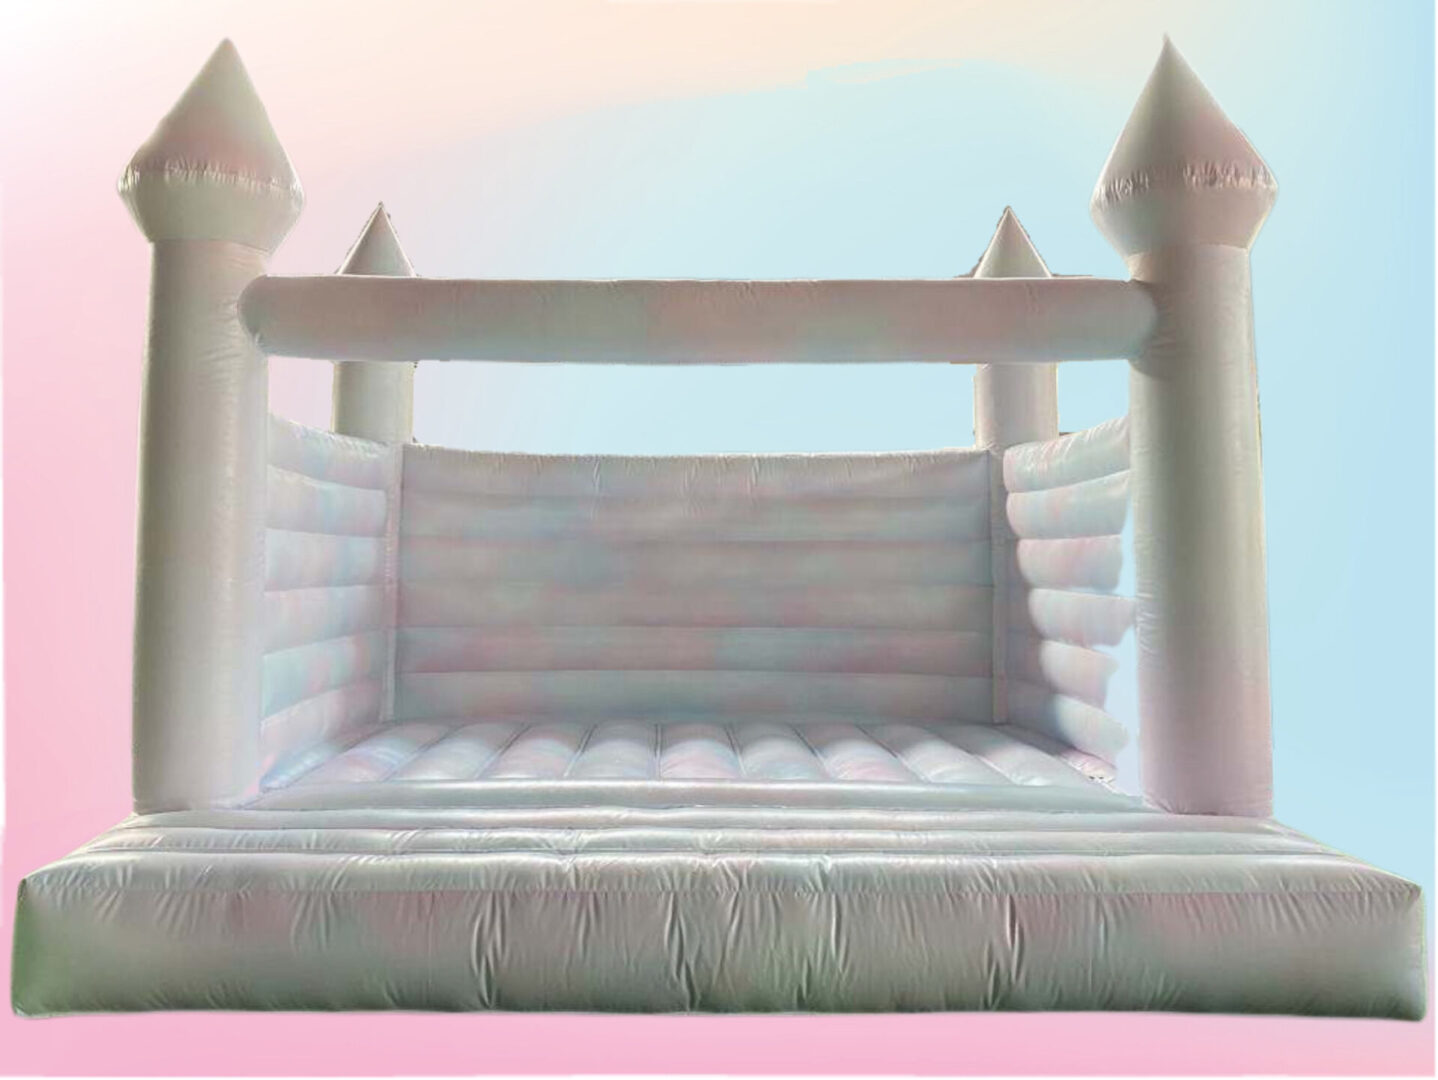 Crumple Classic Bounce House is available for rental